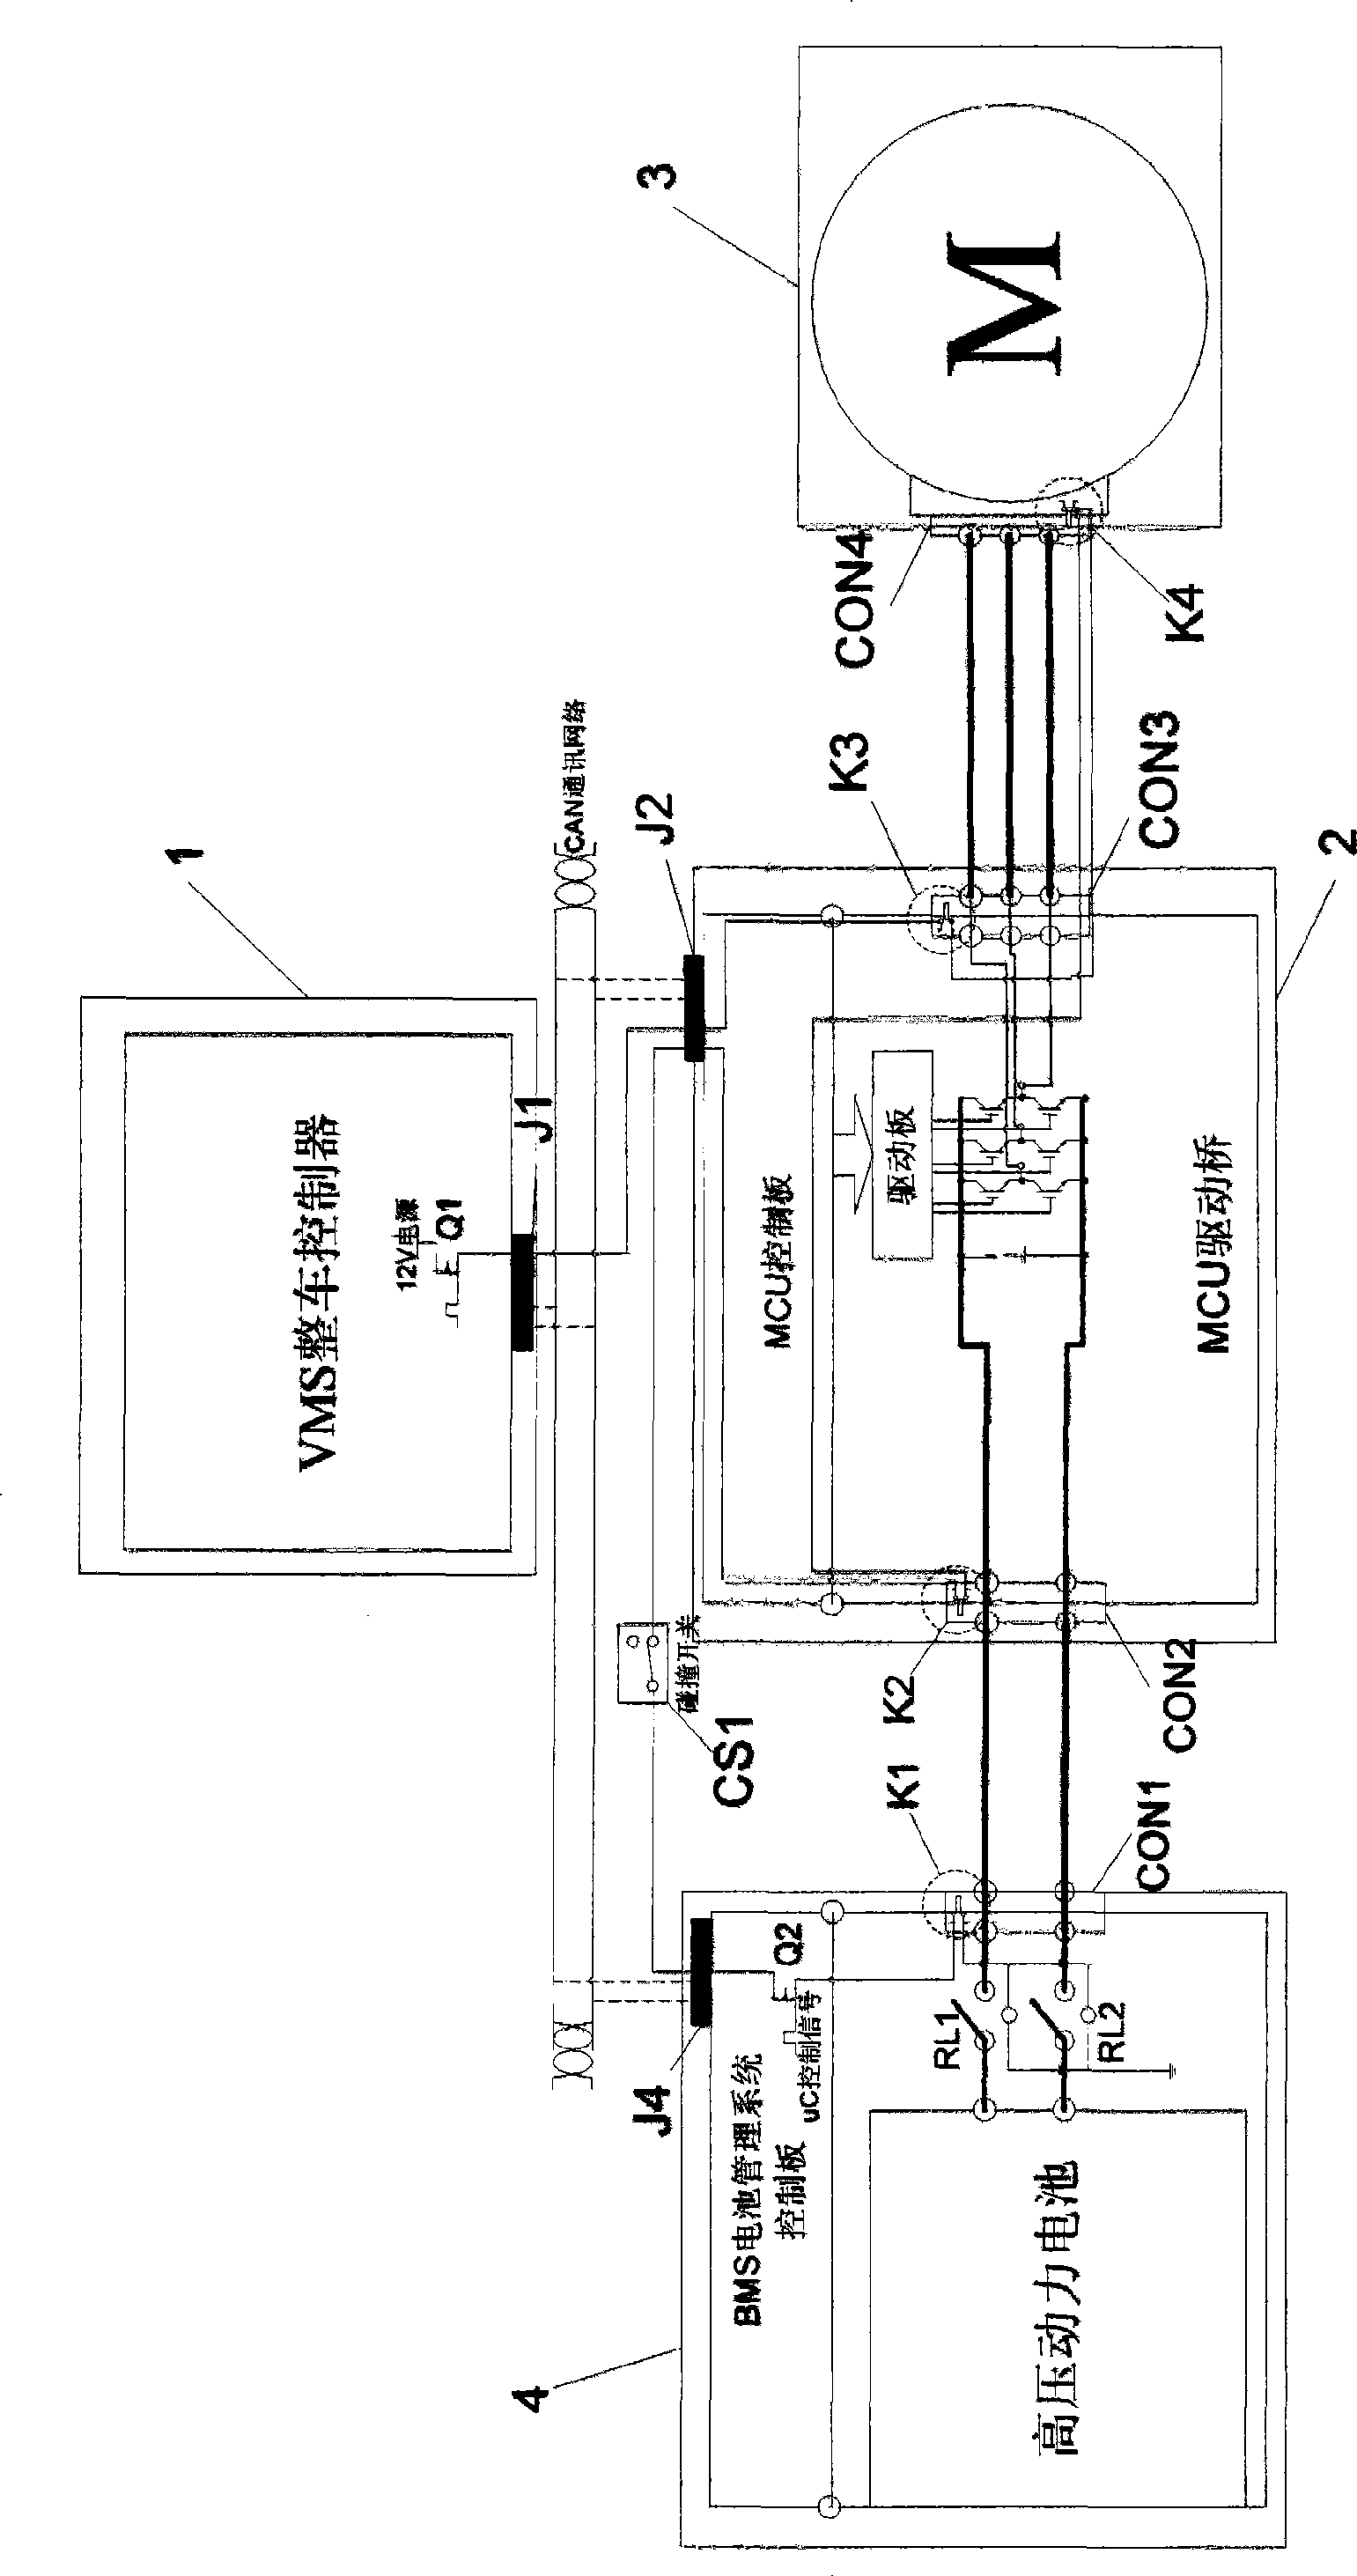 High-voltage double-loop safety system of electric vehicle and method thereof